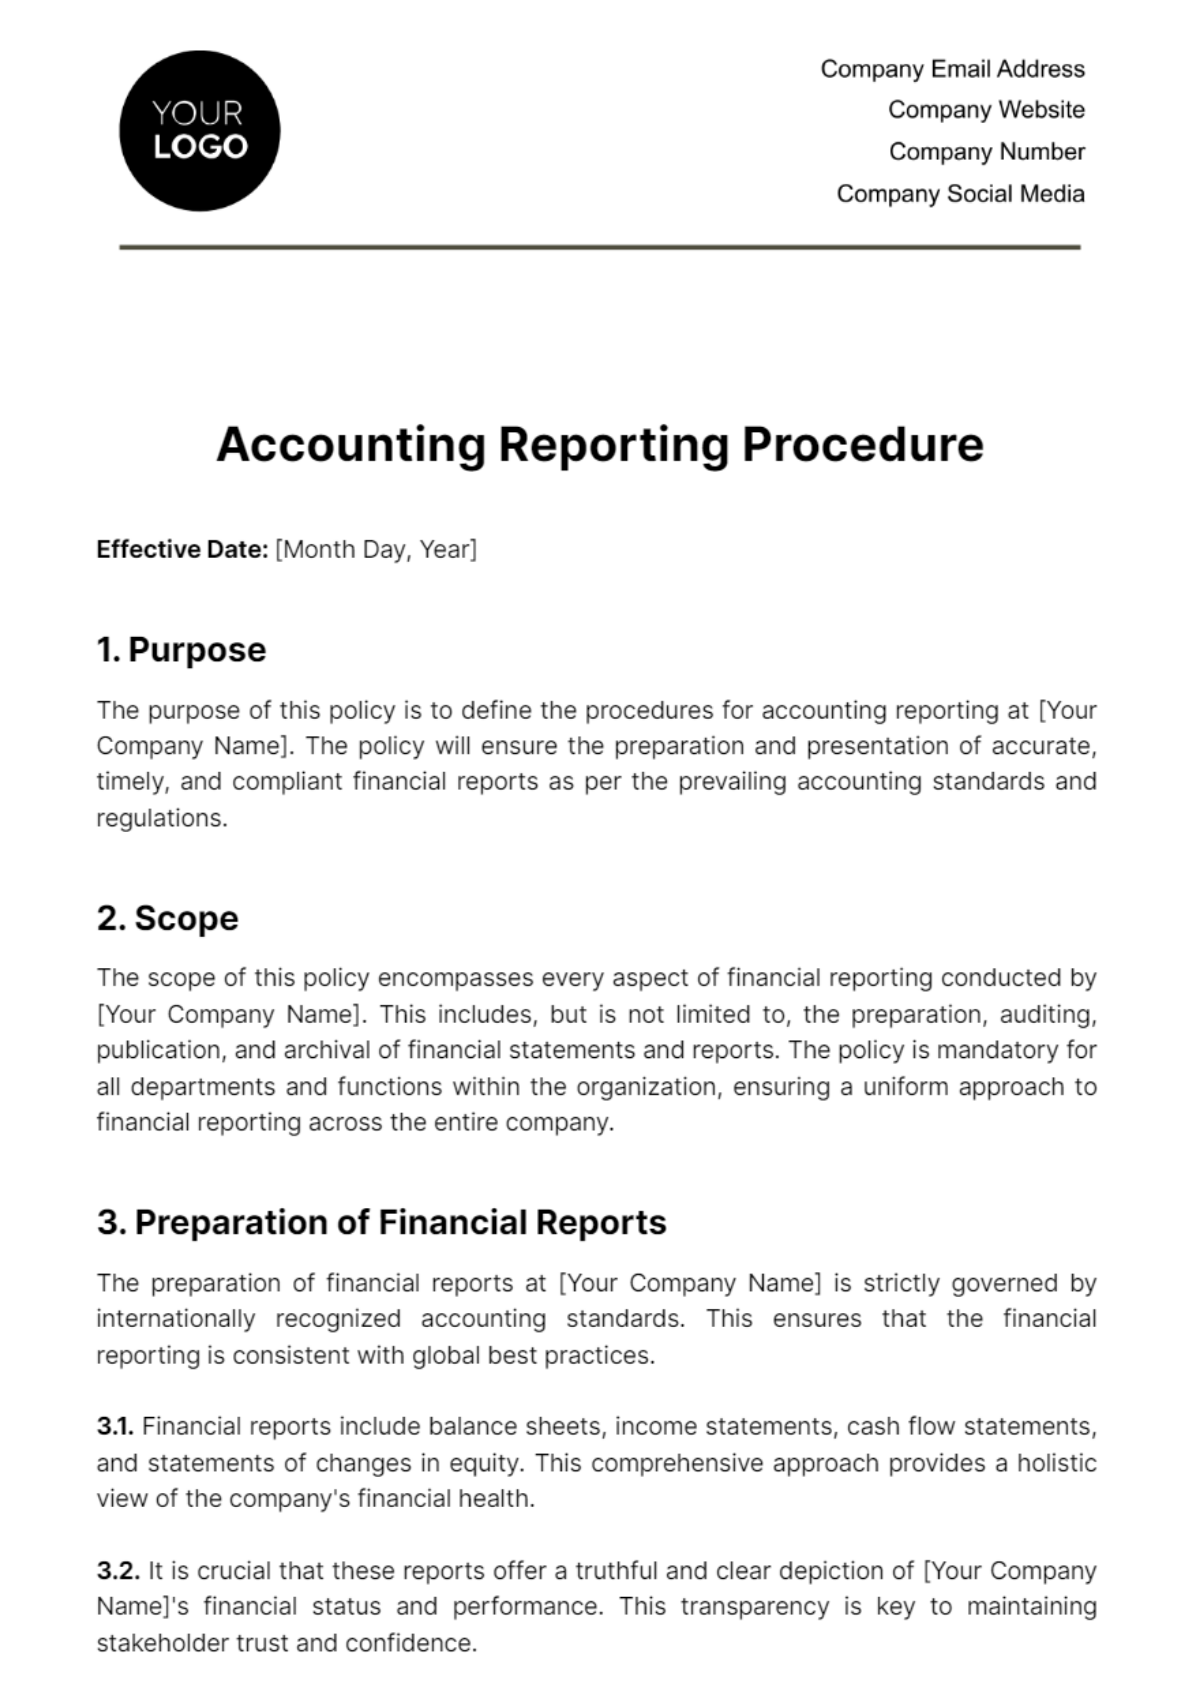 Free Accounting Reporting Procedure Template